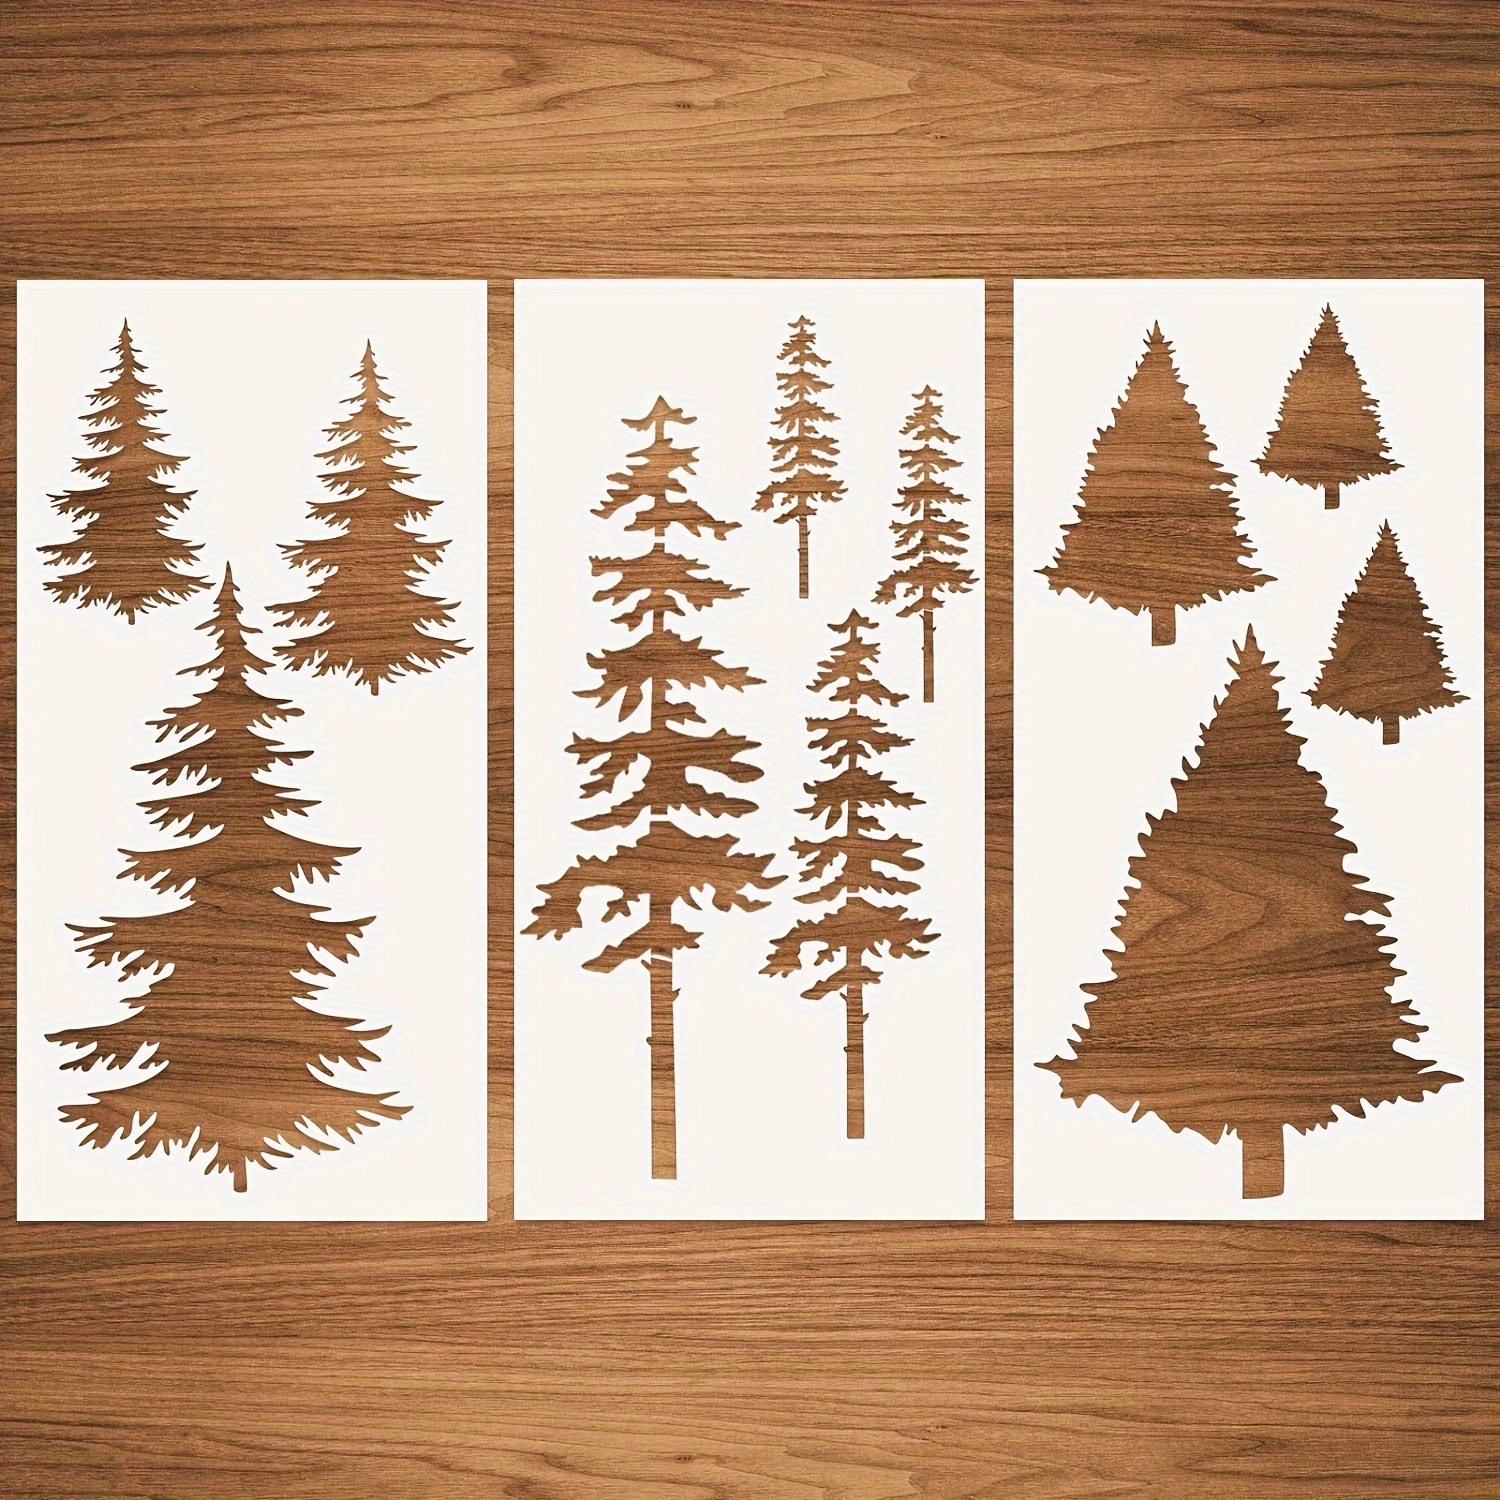 PAGOW 12pcs Pine Trees Stencils, Reusable Pet Drawing Stencils, Art Painting Templates Stencils for Painting on Wood, Winter Christmas DIY for Wall, F